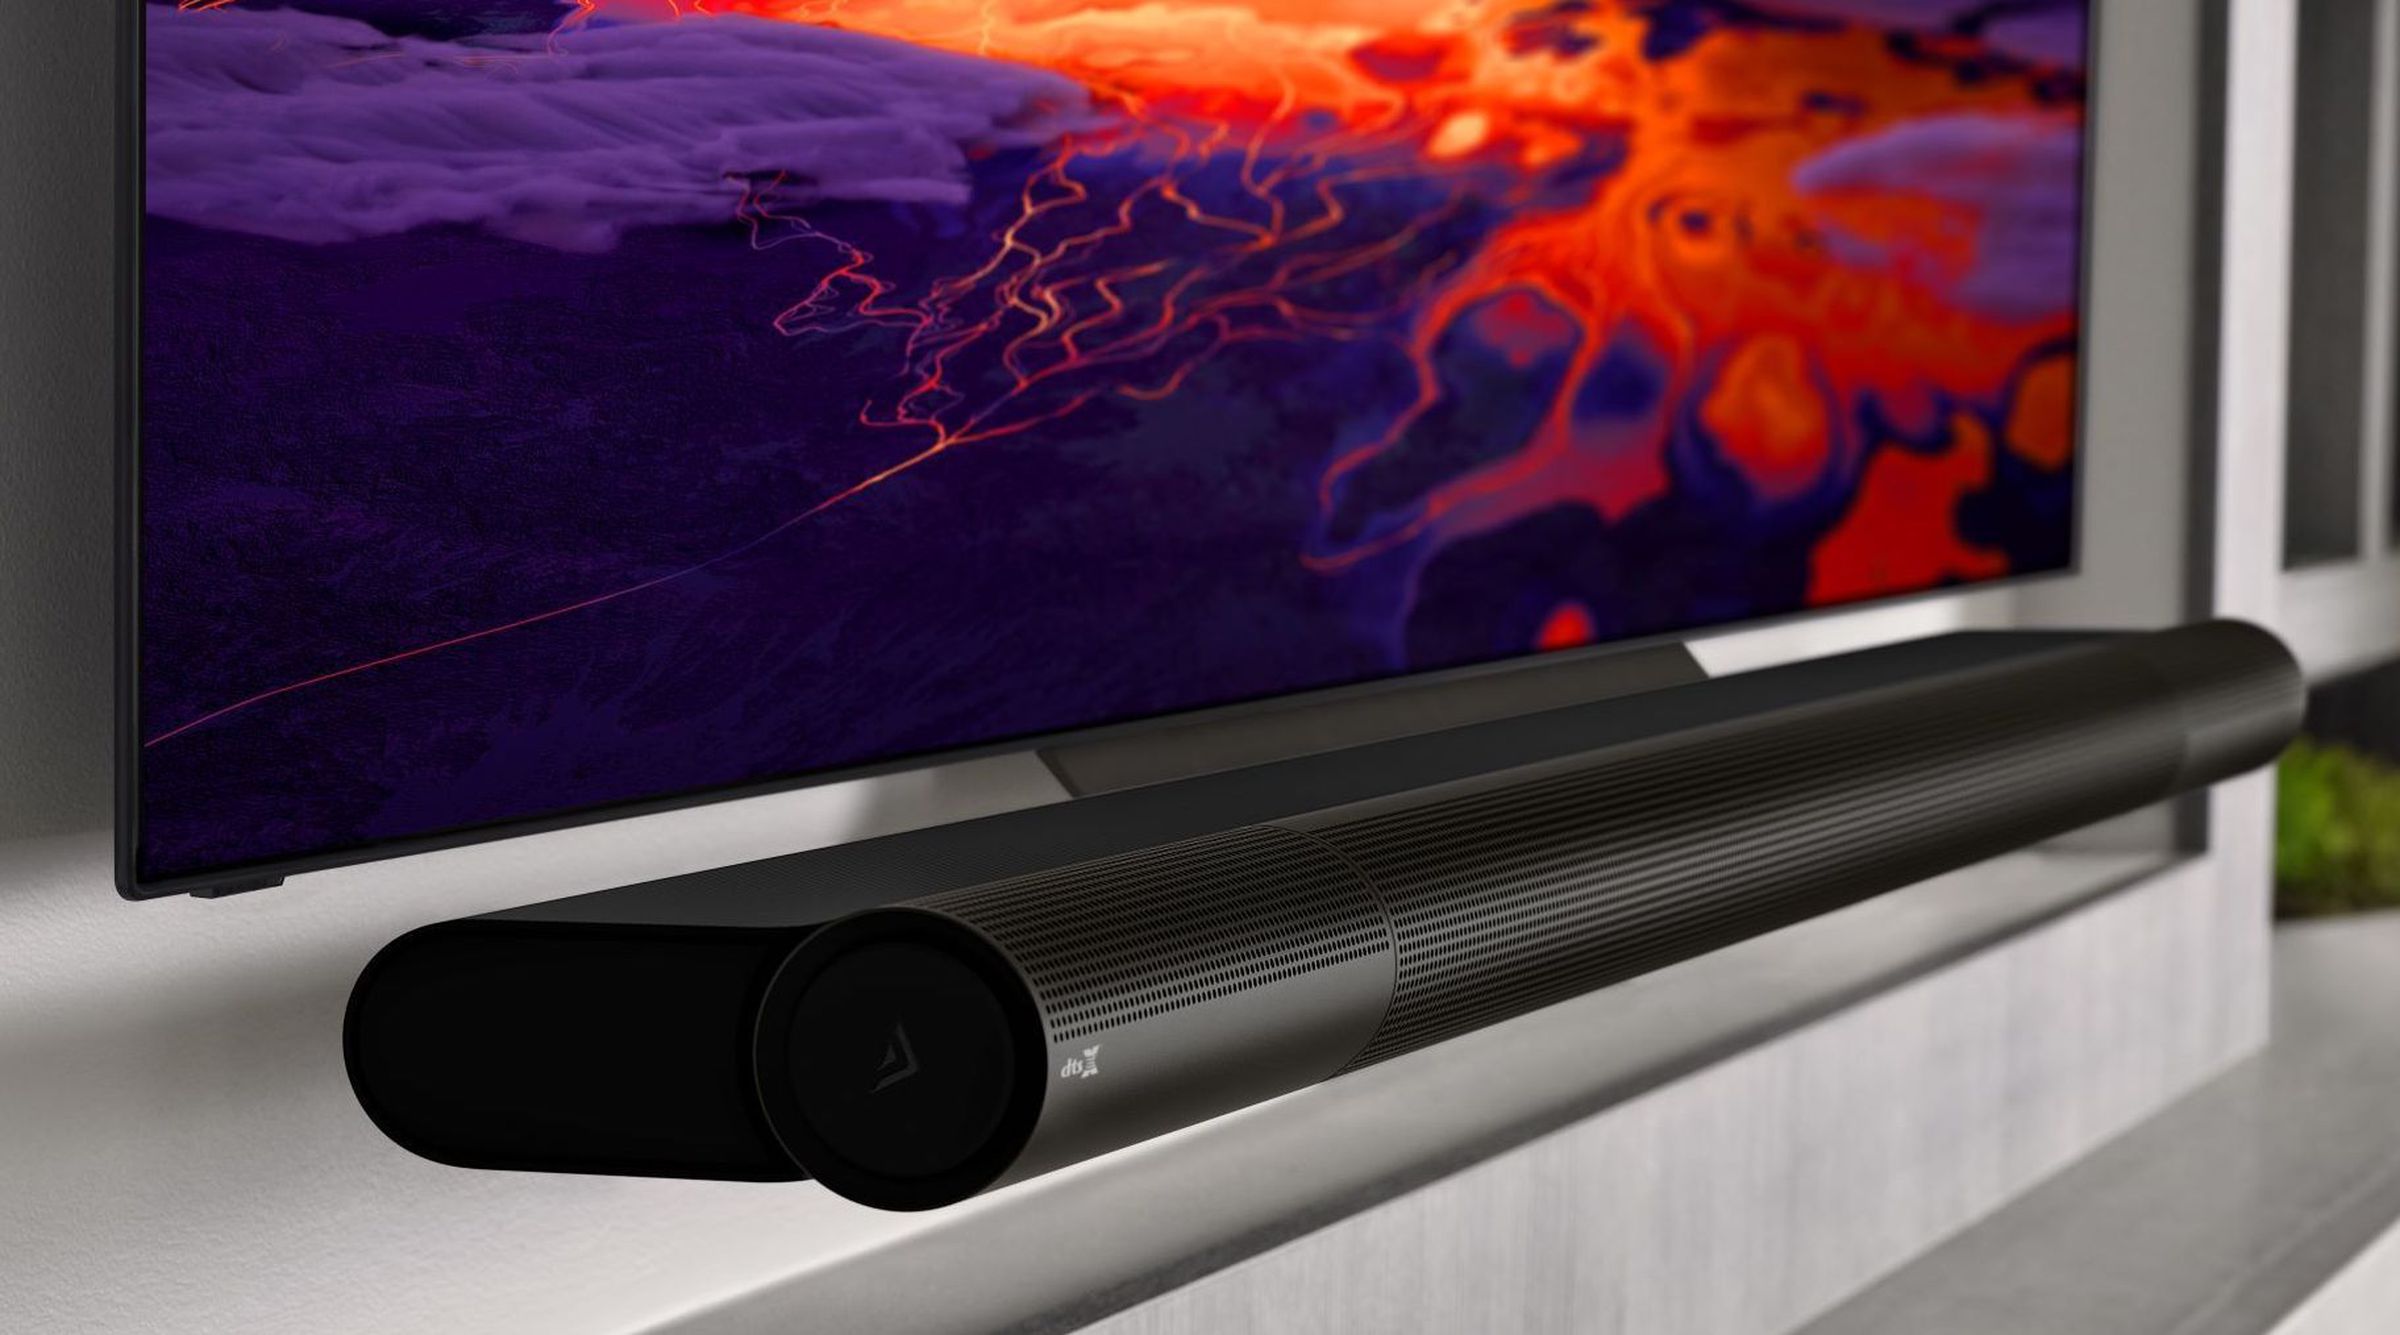 The Vizio Elevate’s side speakers can rotate upwards for Atmos content.